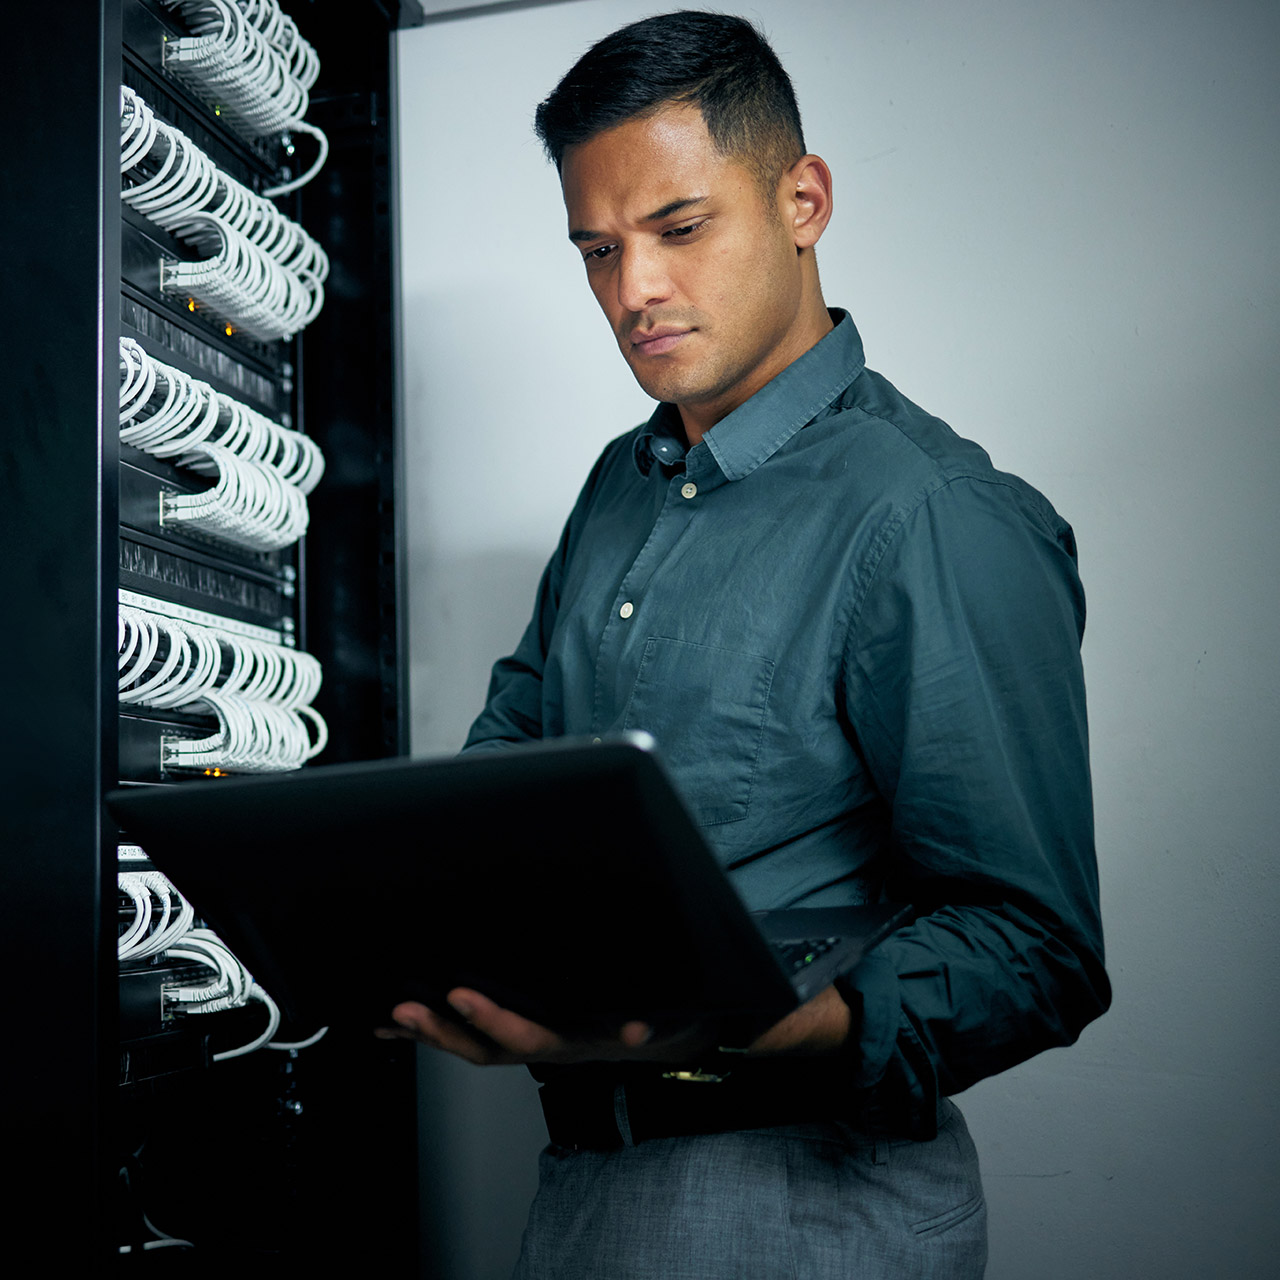 Troubleshooting network performance issues with the SonicWall SMA